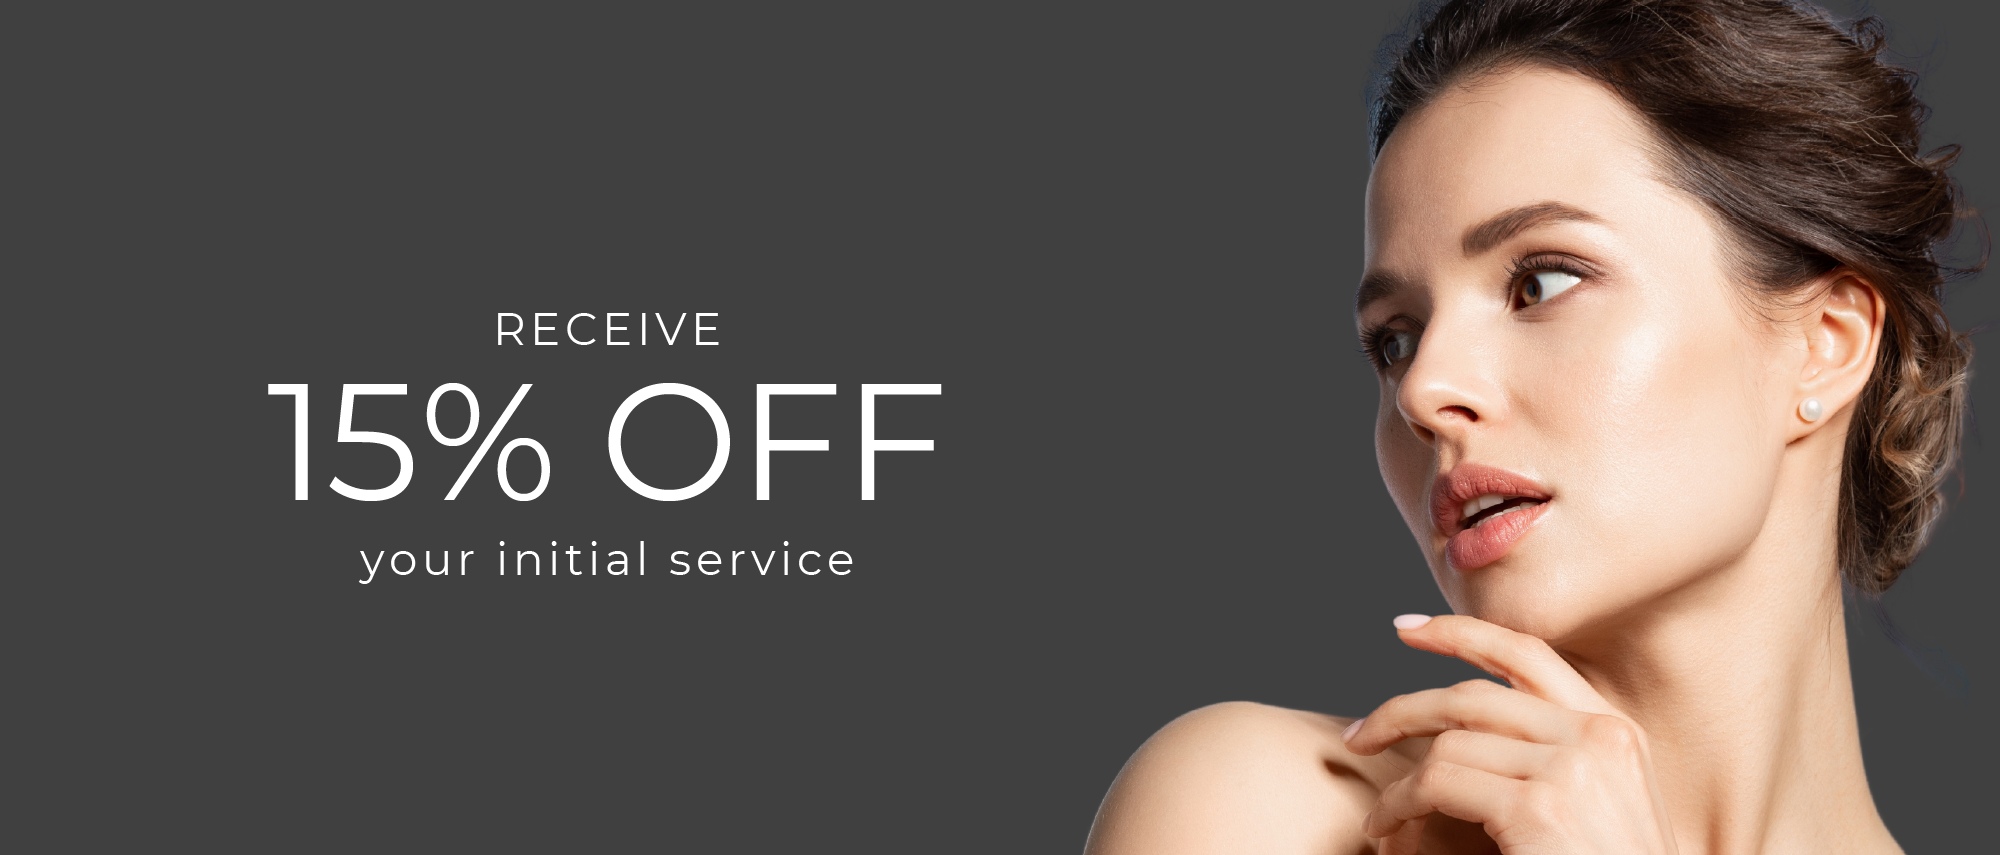 Receive 15 off your initial service banner